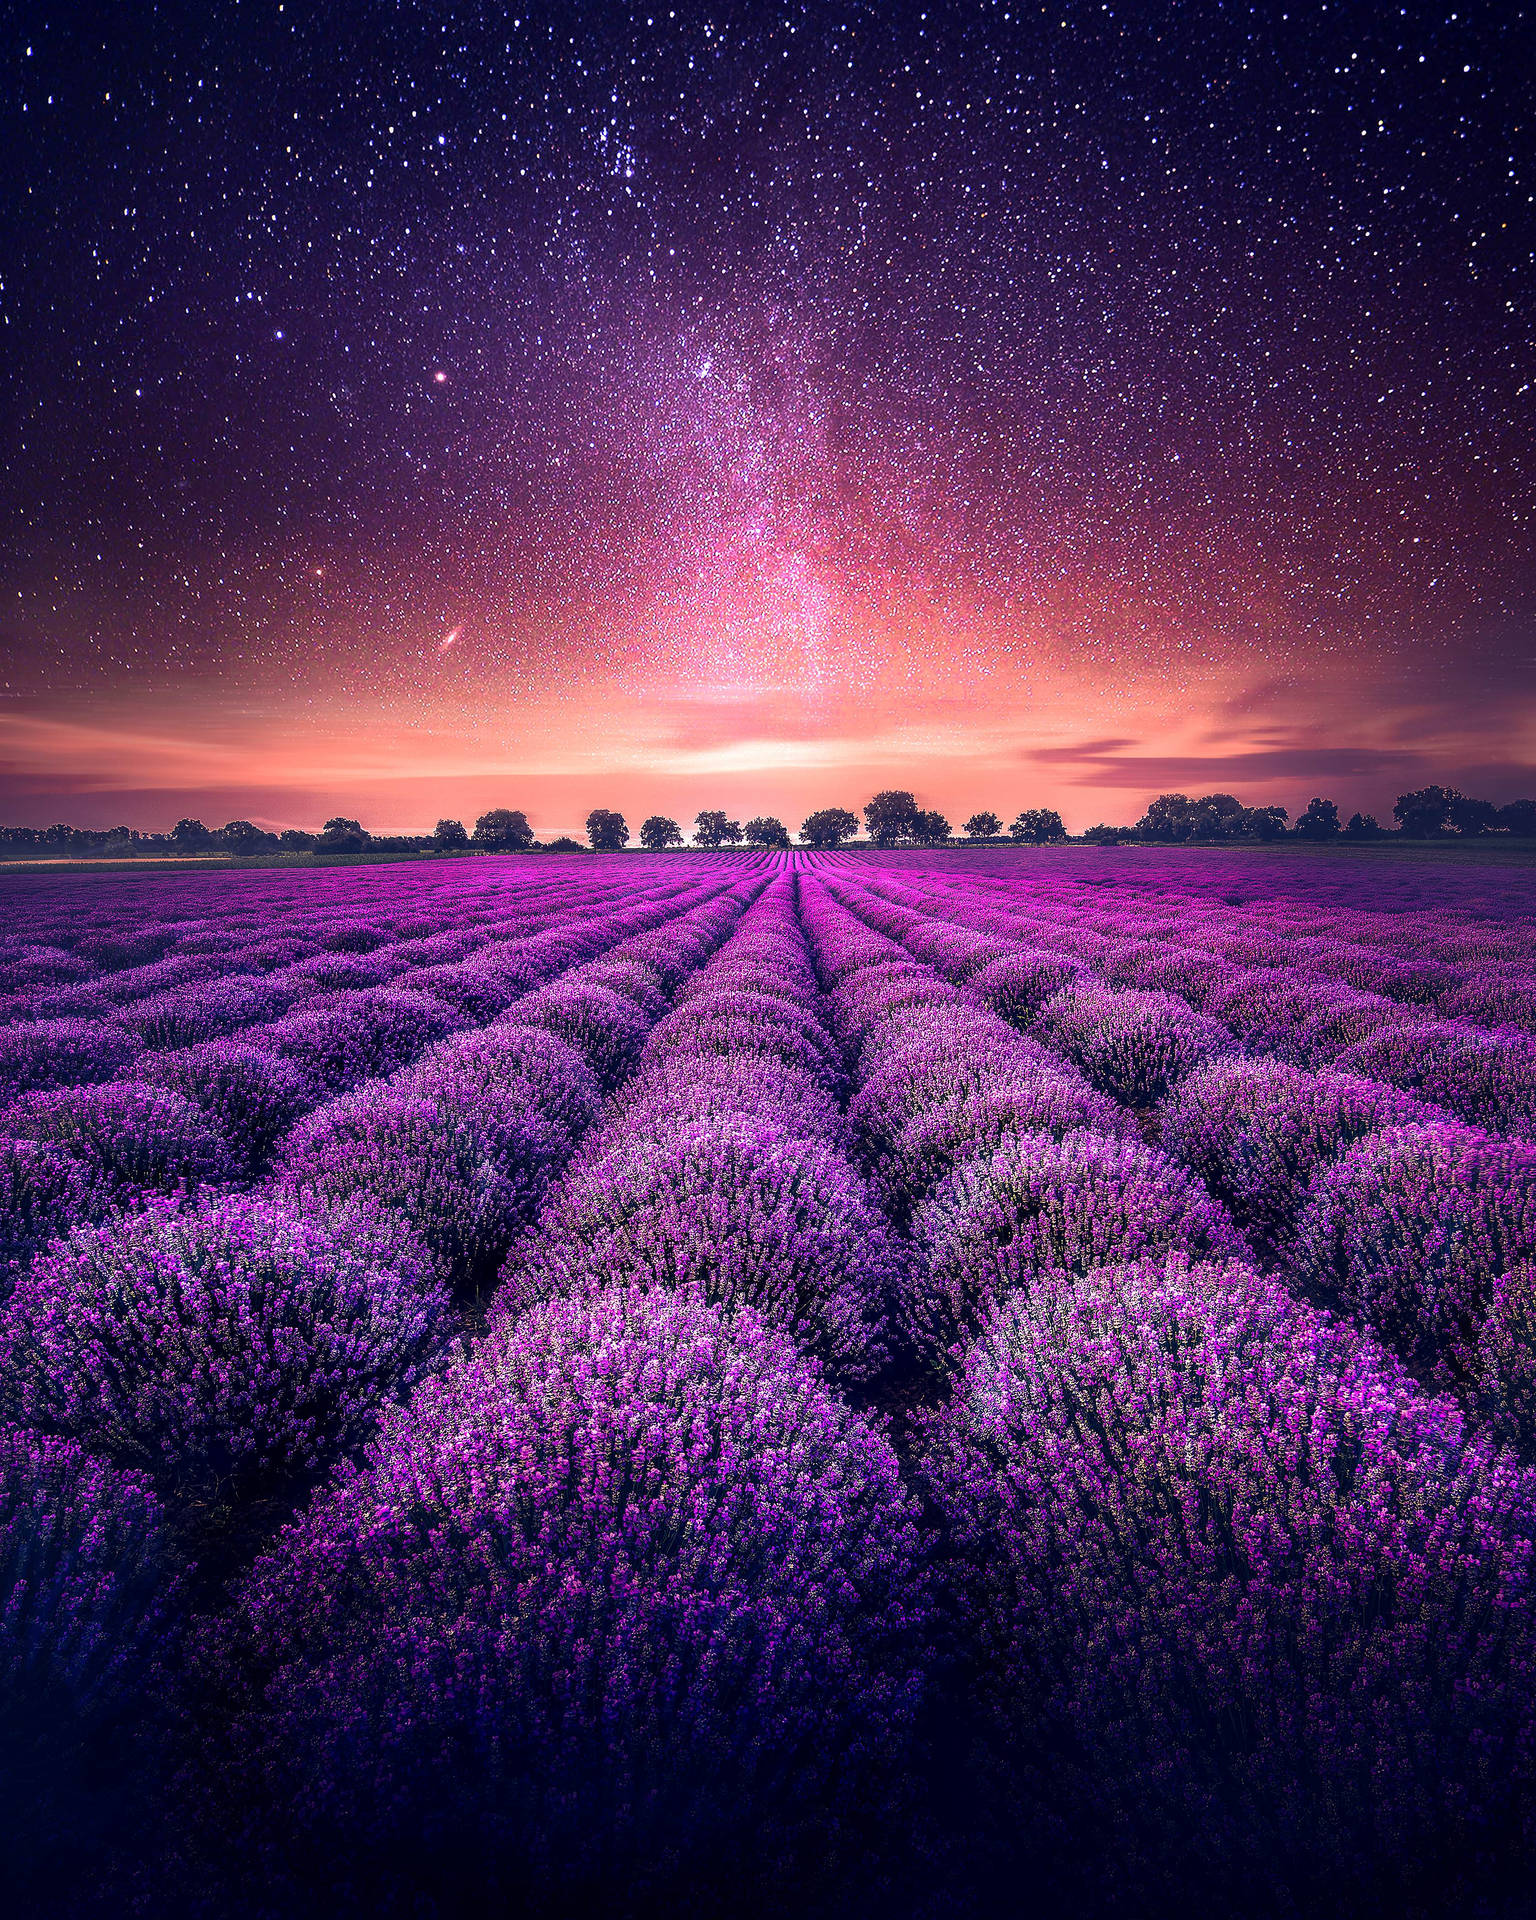 Lavender blossoms unveil a star-studded night in France Wallpaper